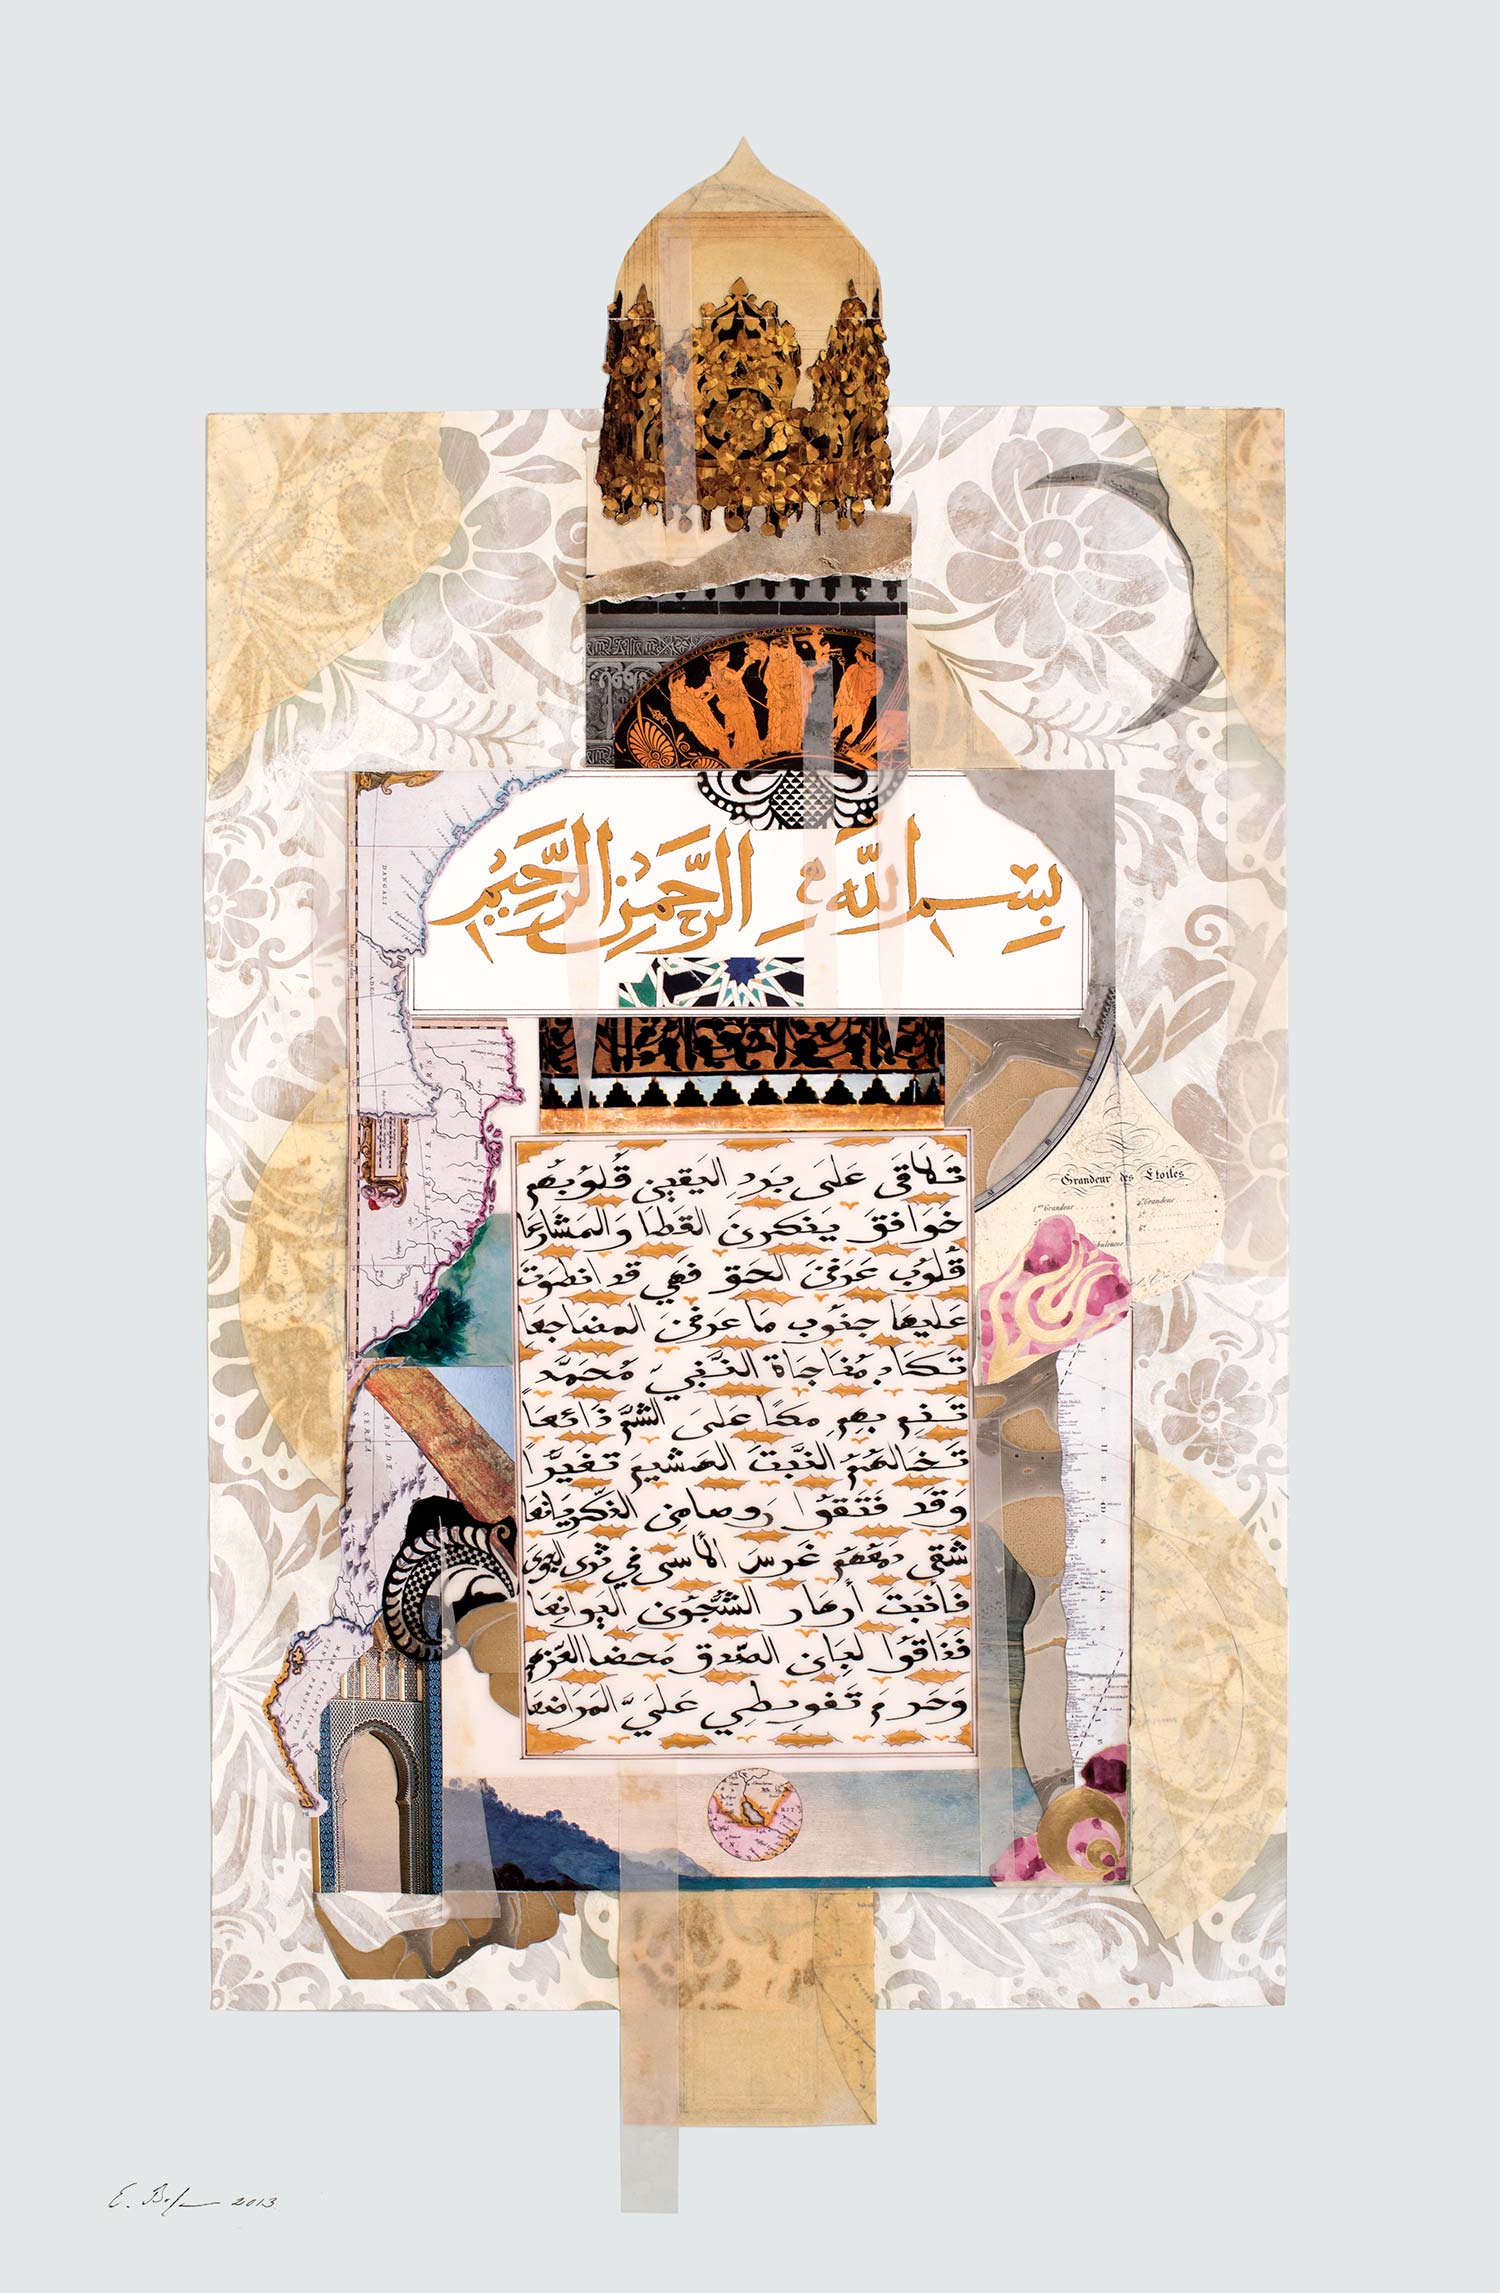   The Pilgrimage from Al Andalus to Arabia II  Private Collection HRH Prince Sultan bin Salman, Kingdom of Saudi Arabia Paper, stucco, Chinese ink and gold paint on hand painted solid mount board base 100 x 55 cm 2013 